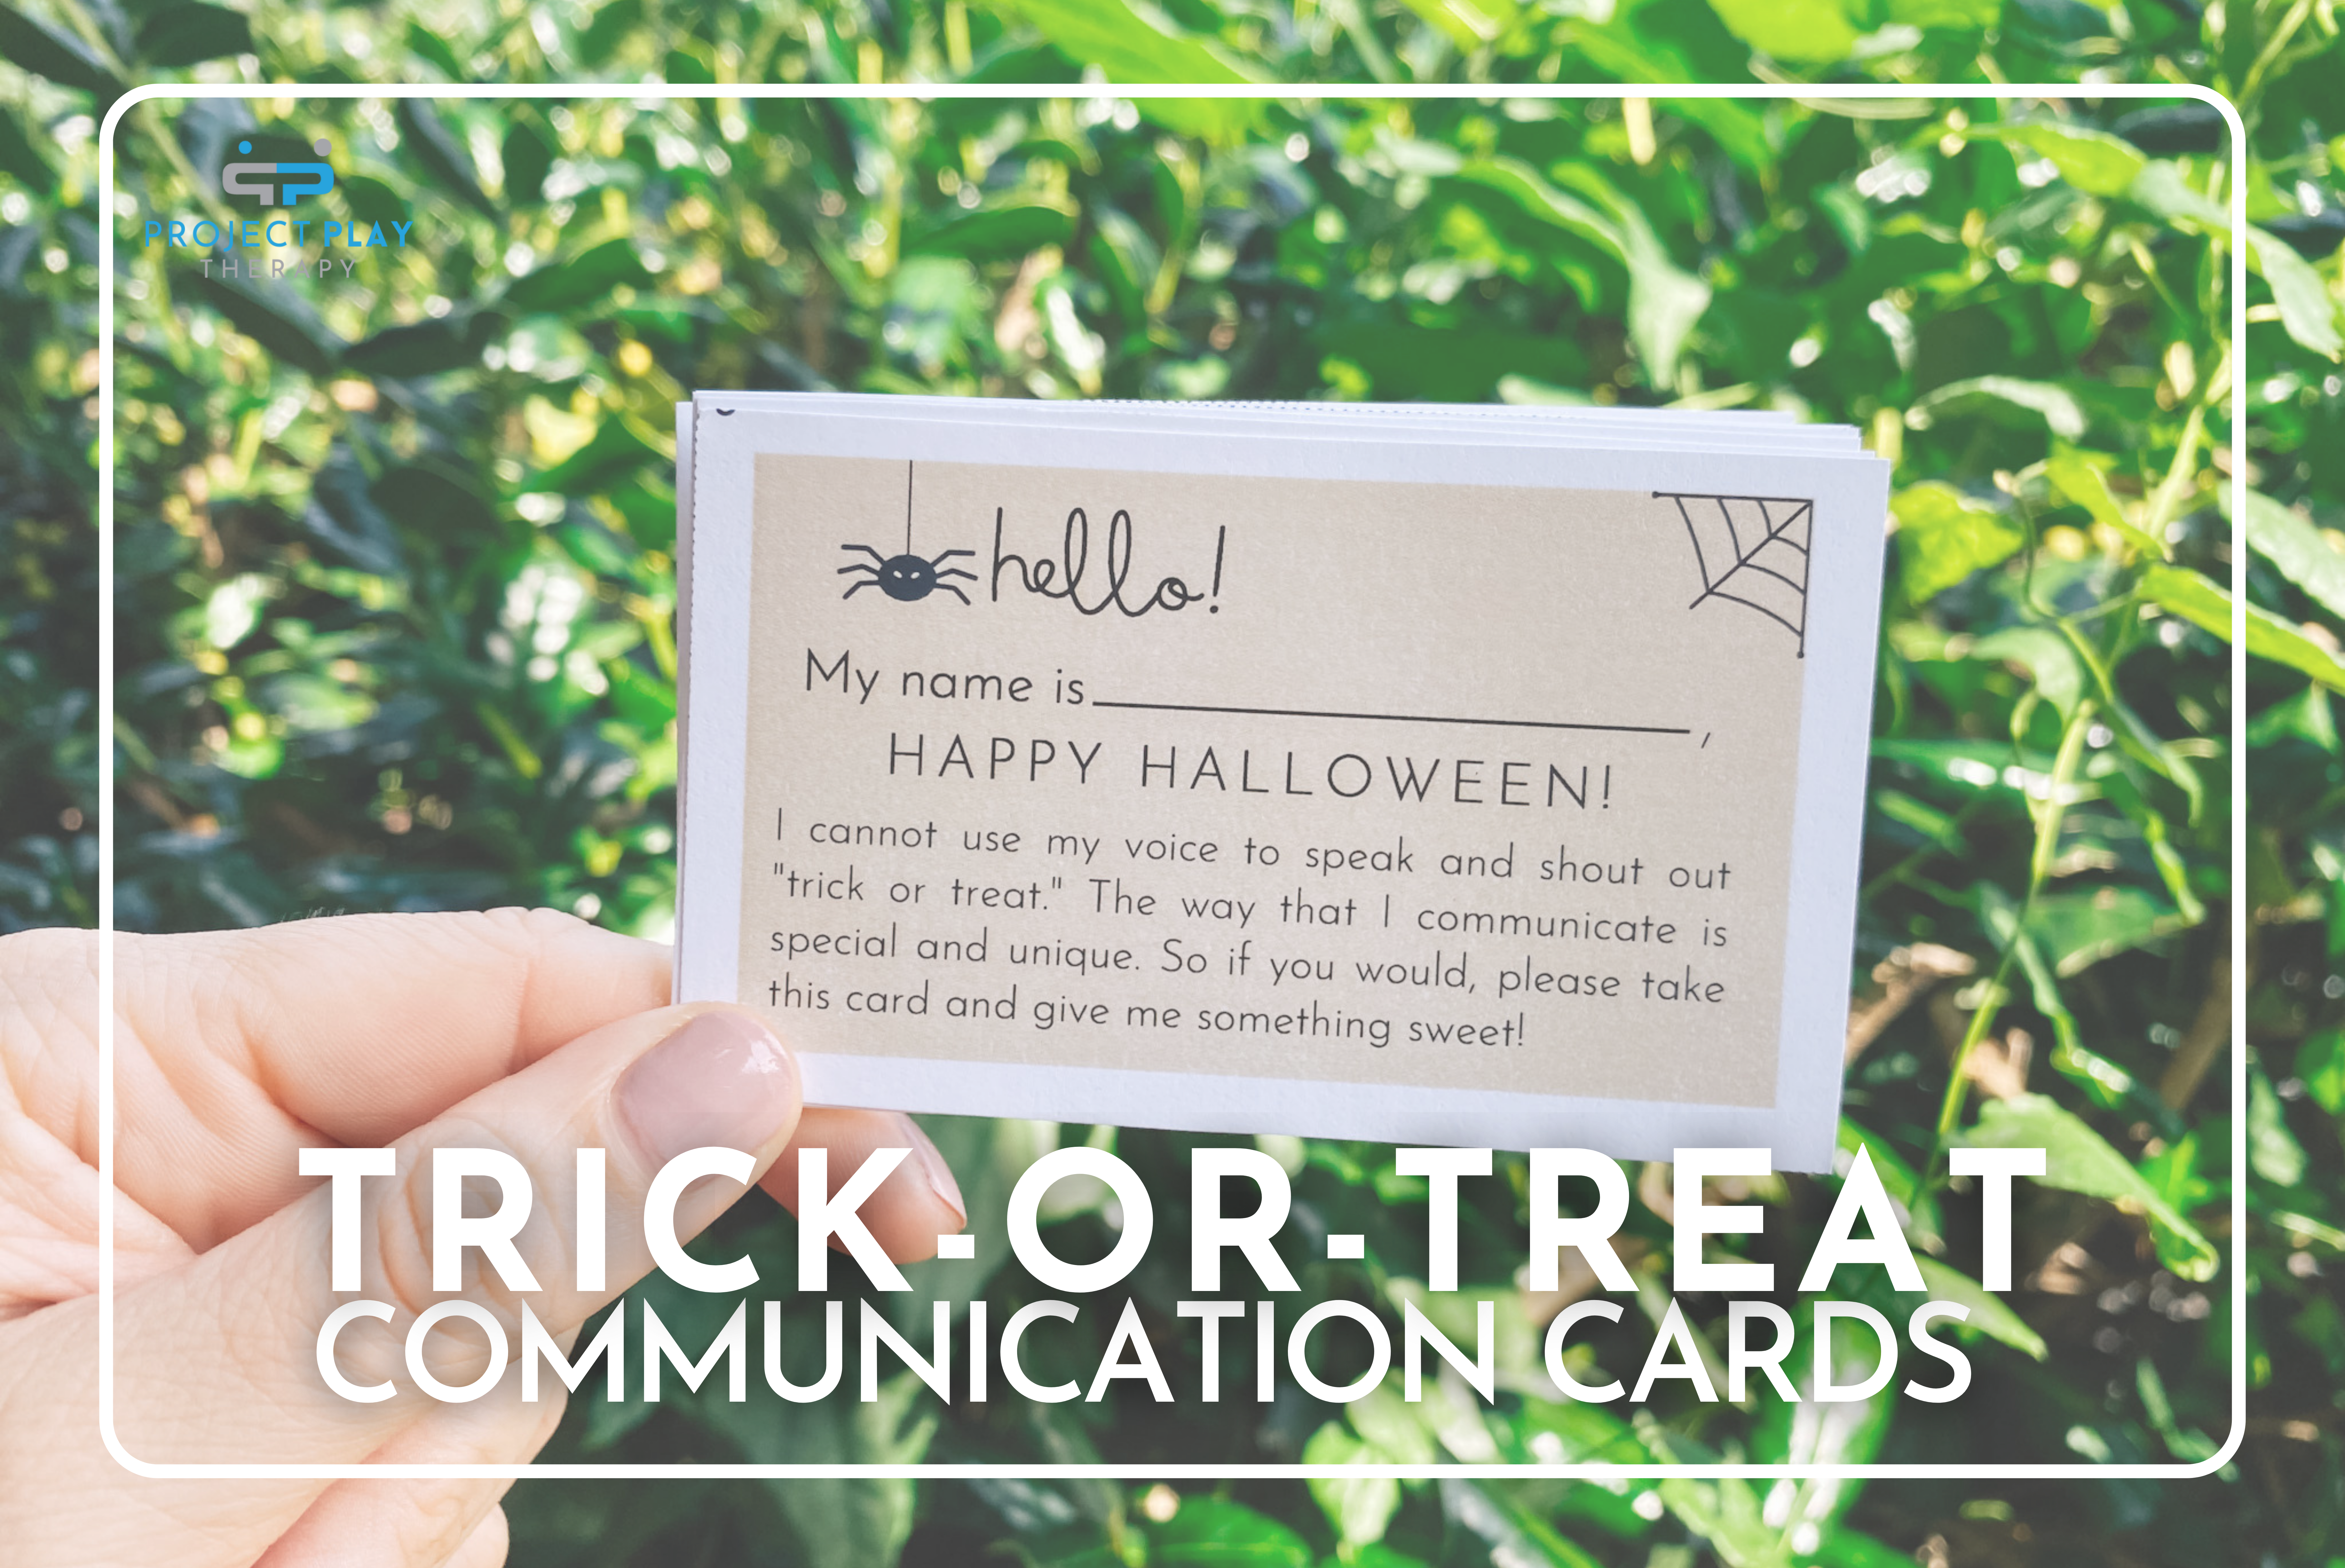 Trick-or-Treat Communication Cards